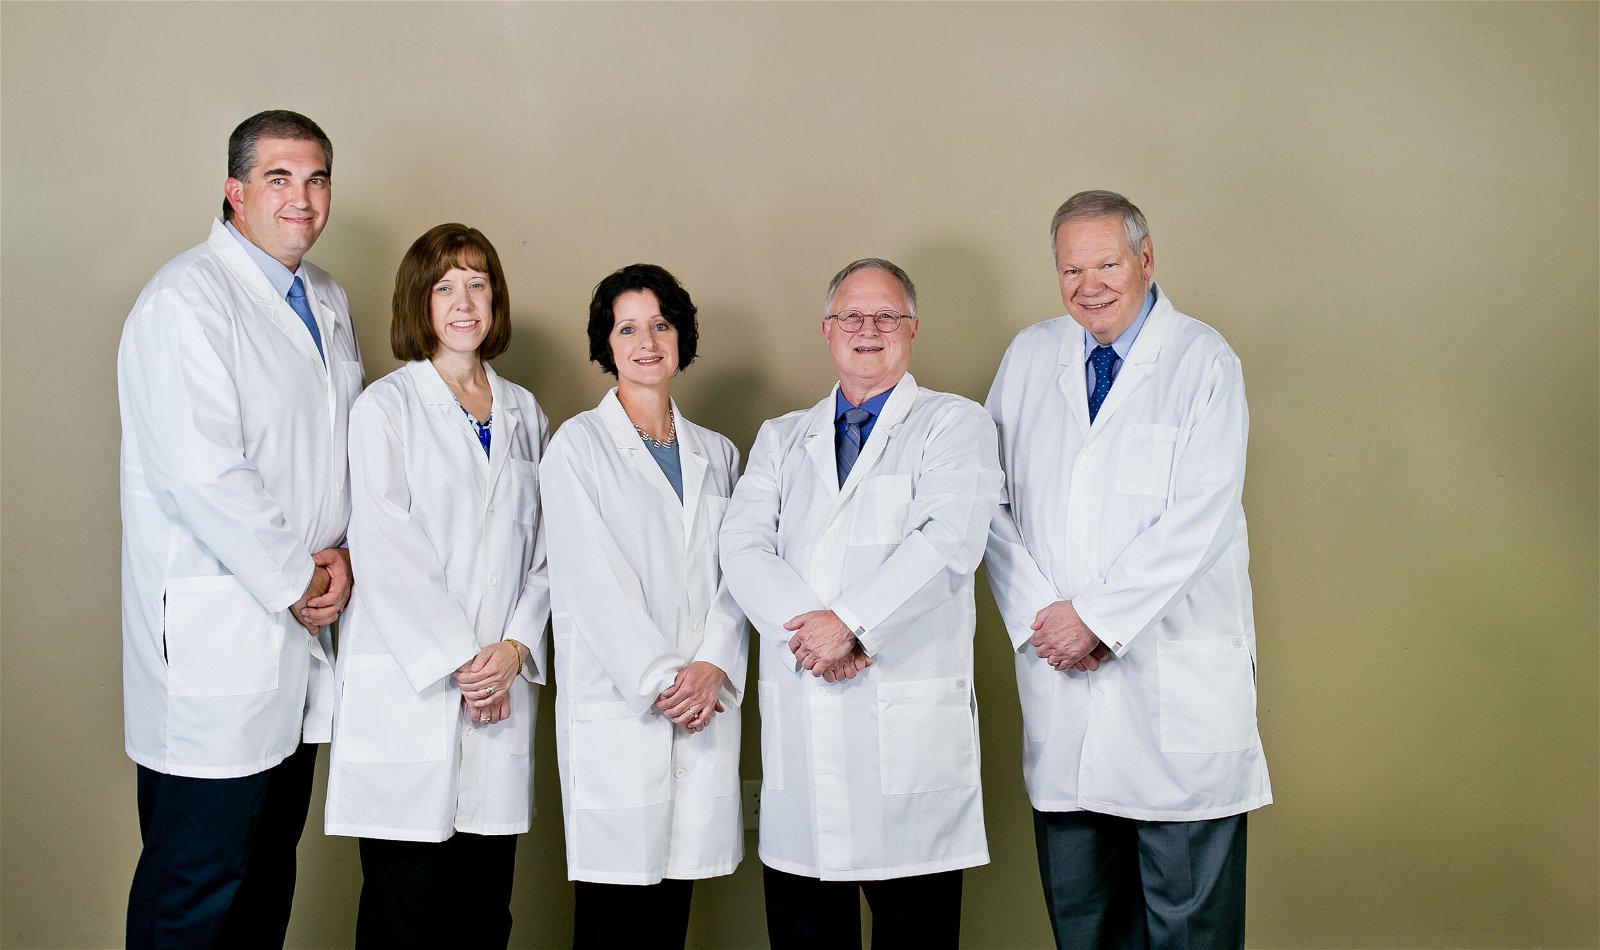 Dr. Menton with a group of doctors.